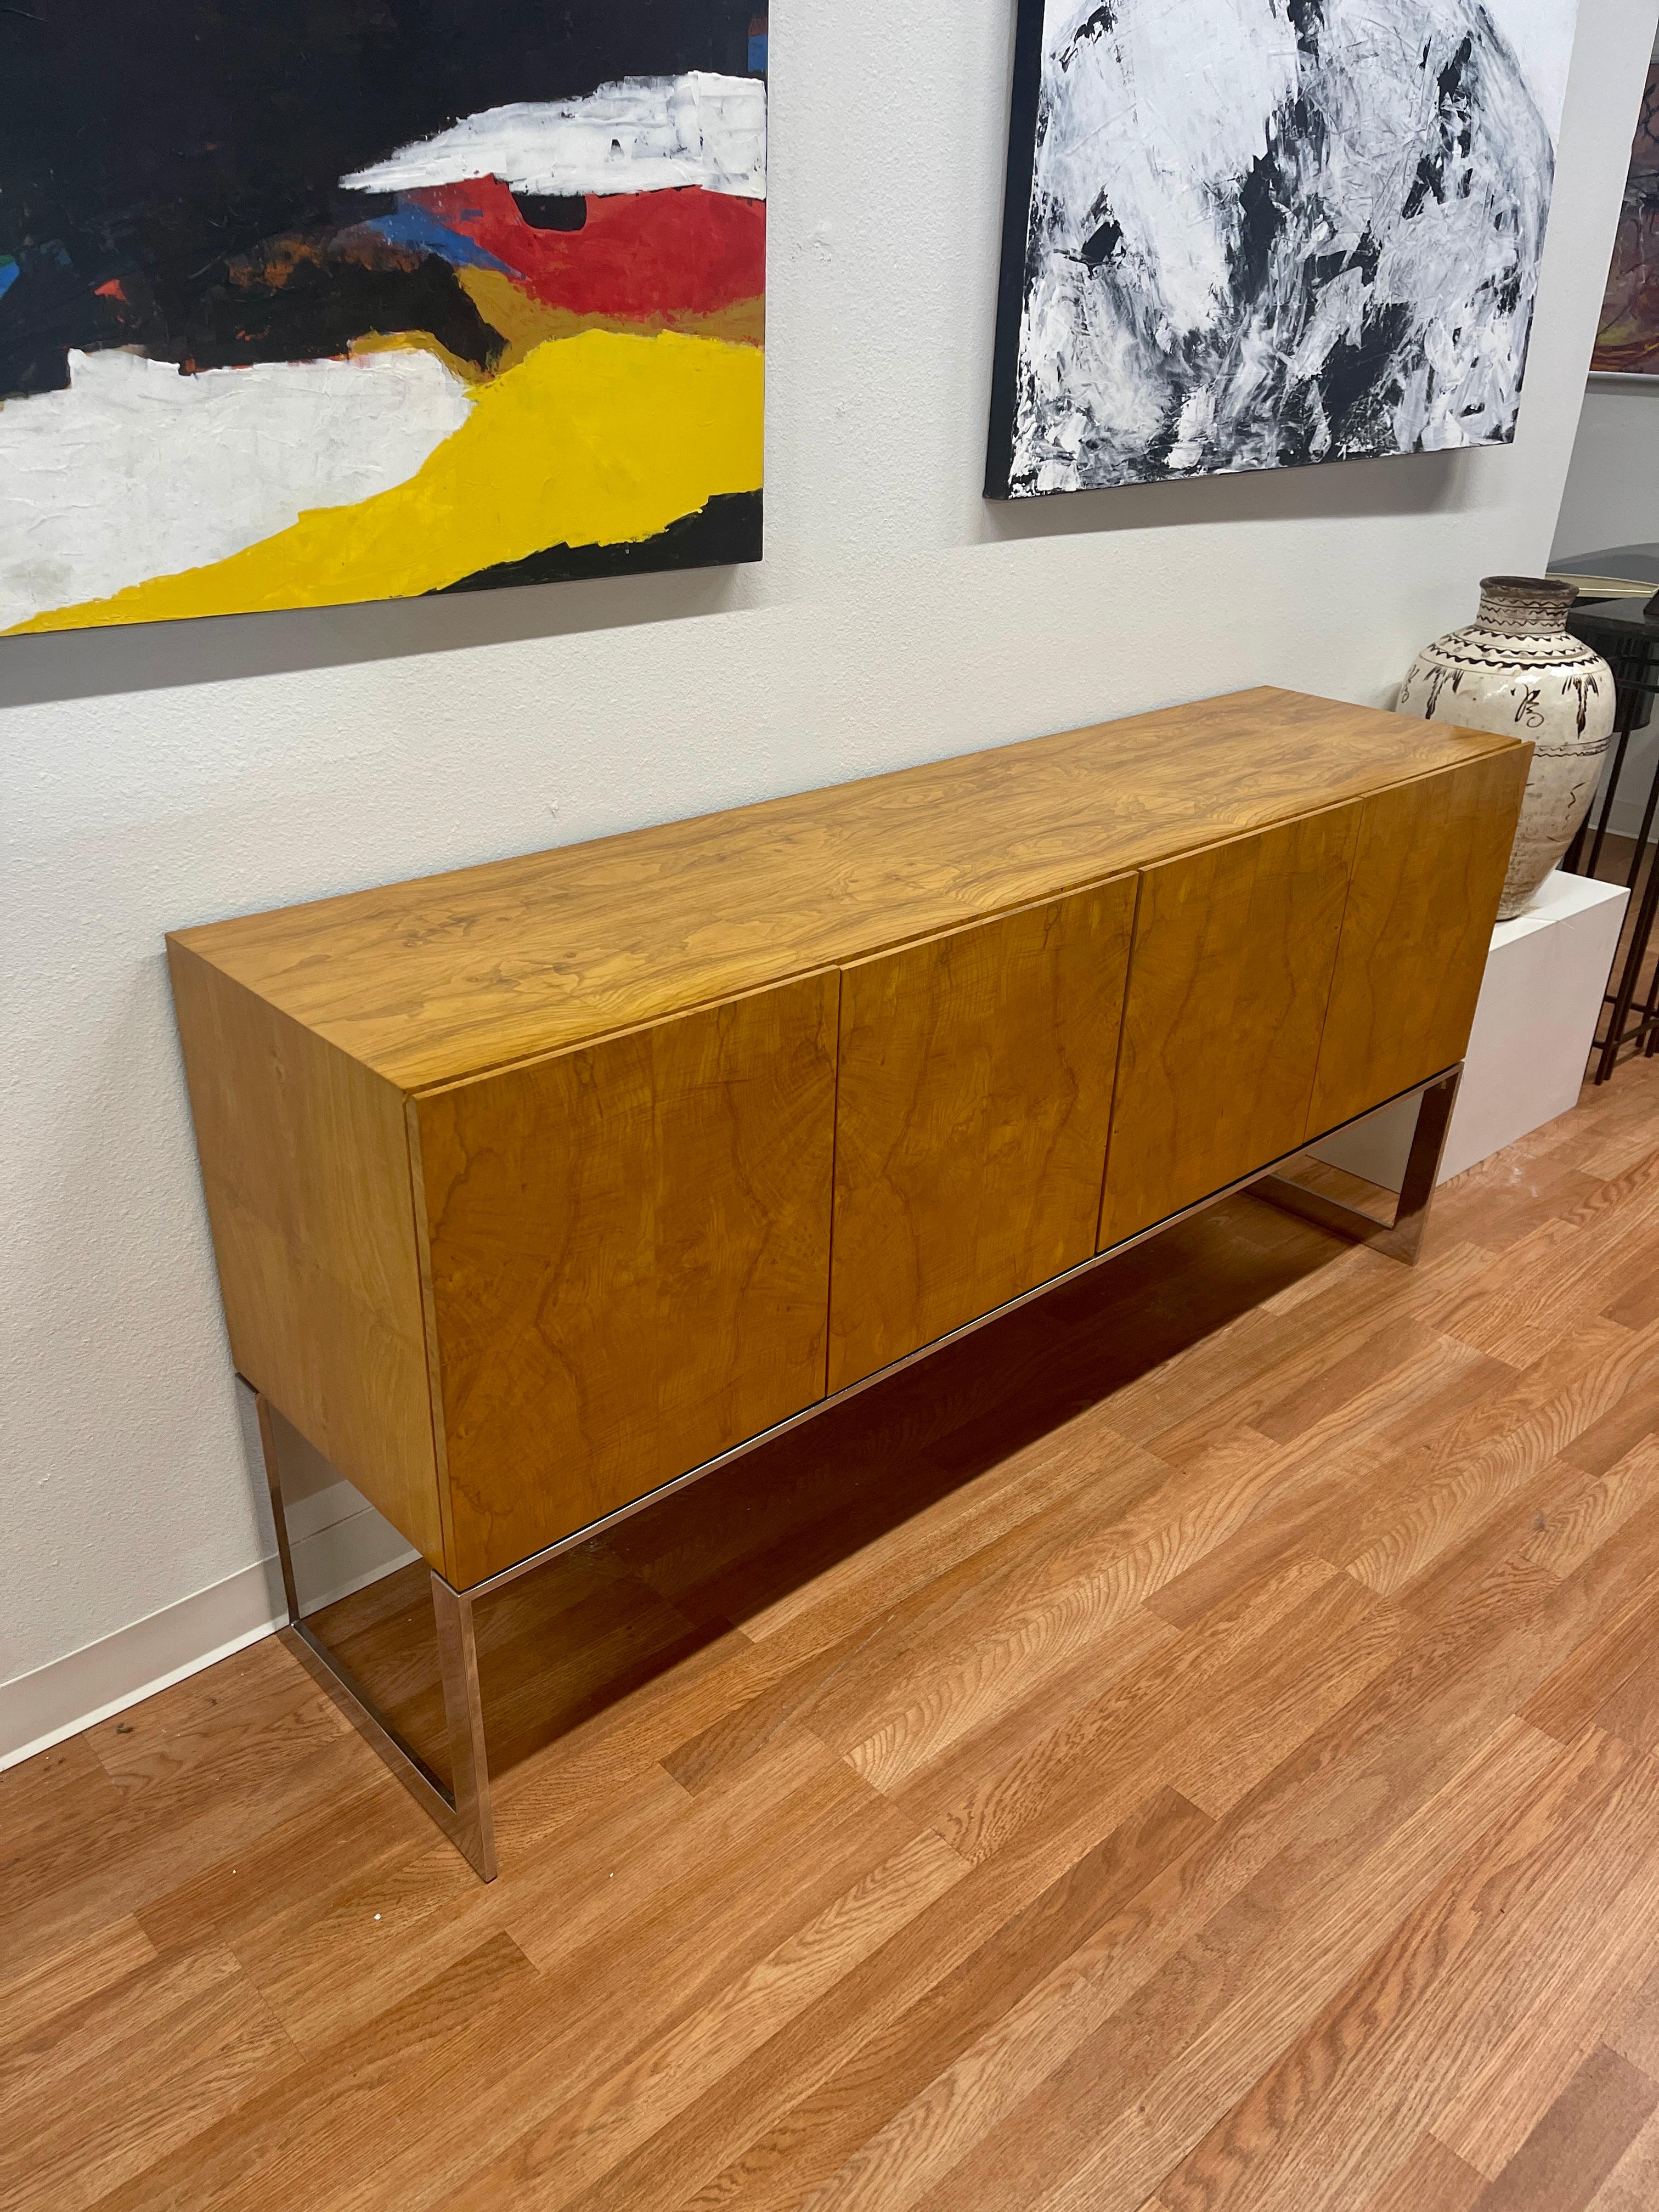 Richly grained burl wood veneered credenza by Milo Baughman for Thayer Coggin. Circa 1970’s. White painted interior. On chromed steel base. The exterior is in good condition, with minor marks. The interior has some spots of missing paint and rough